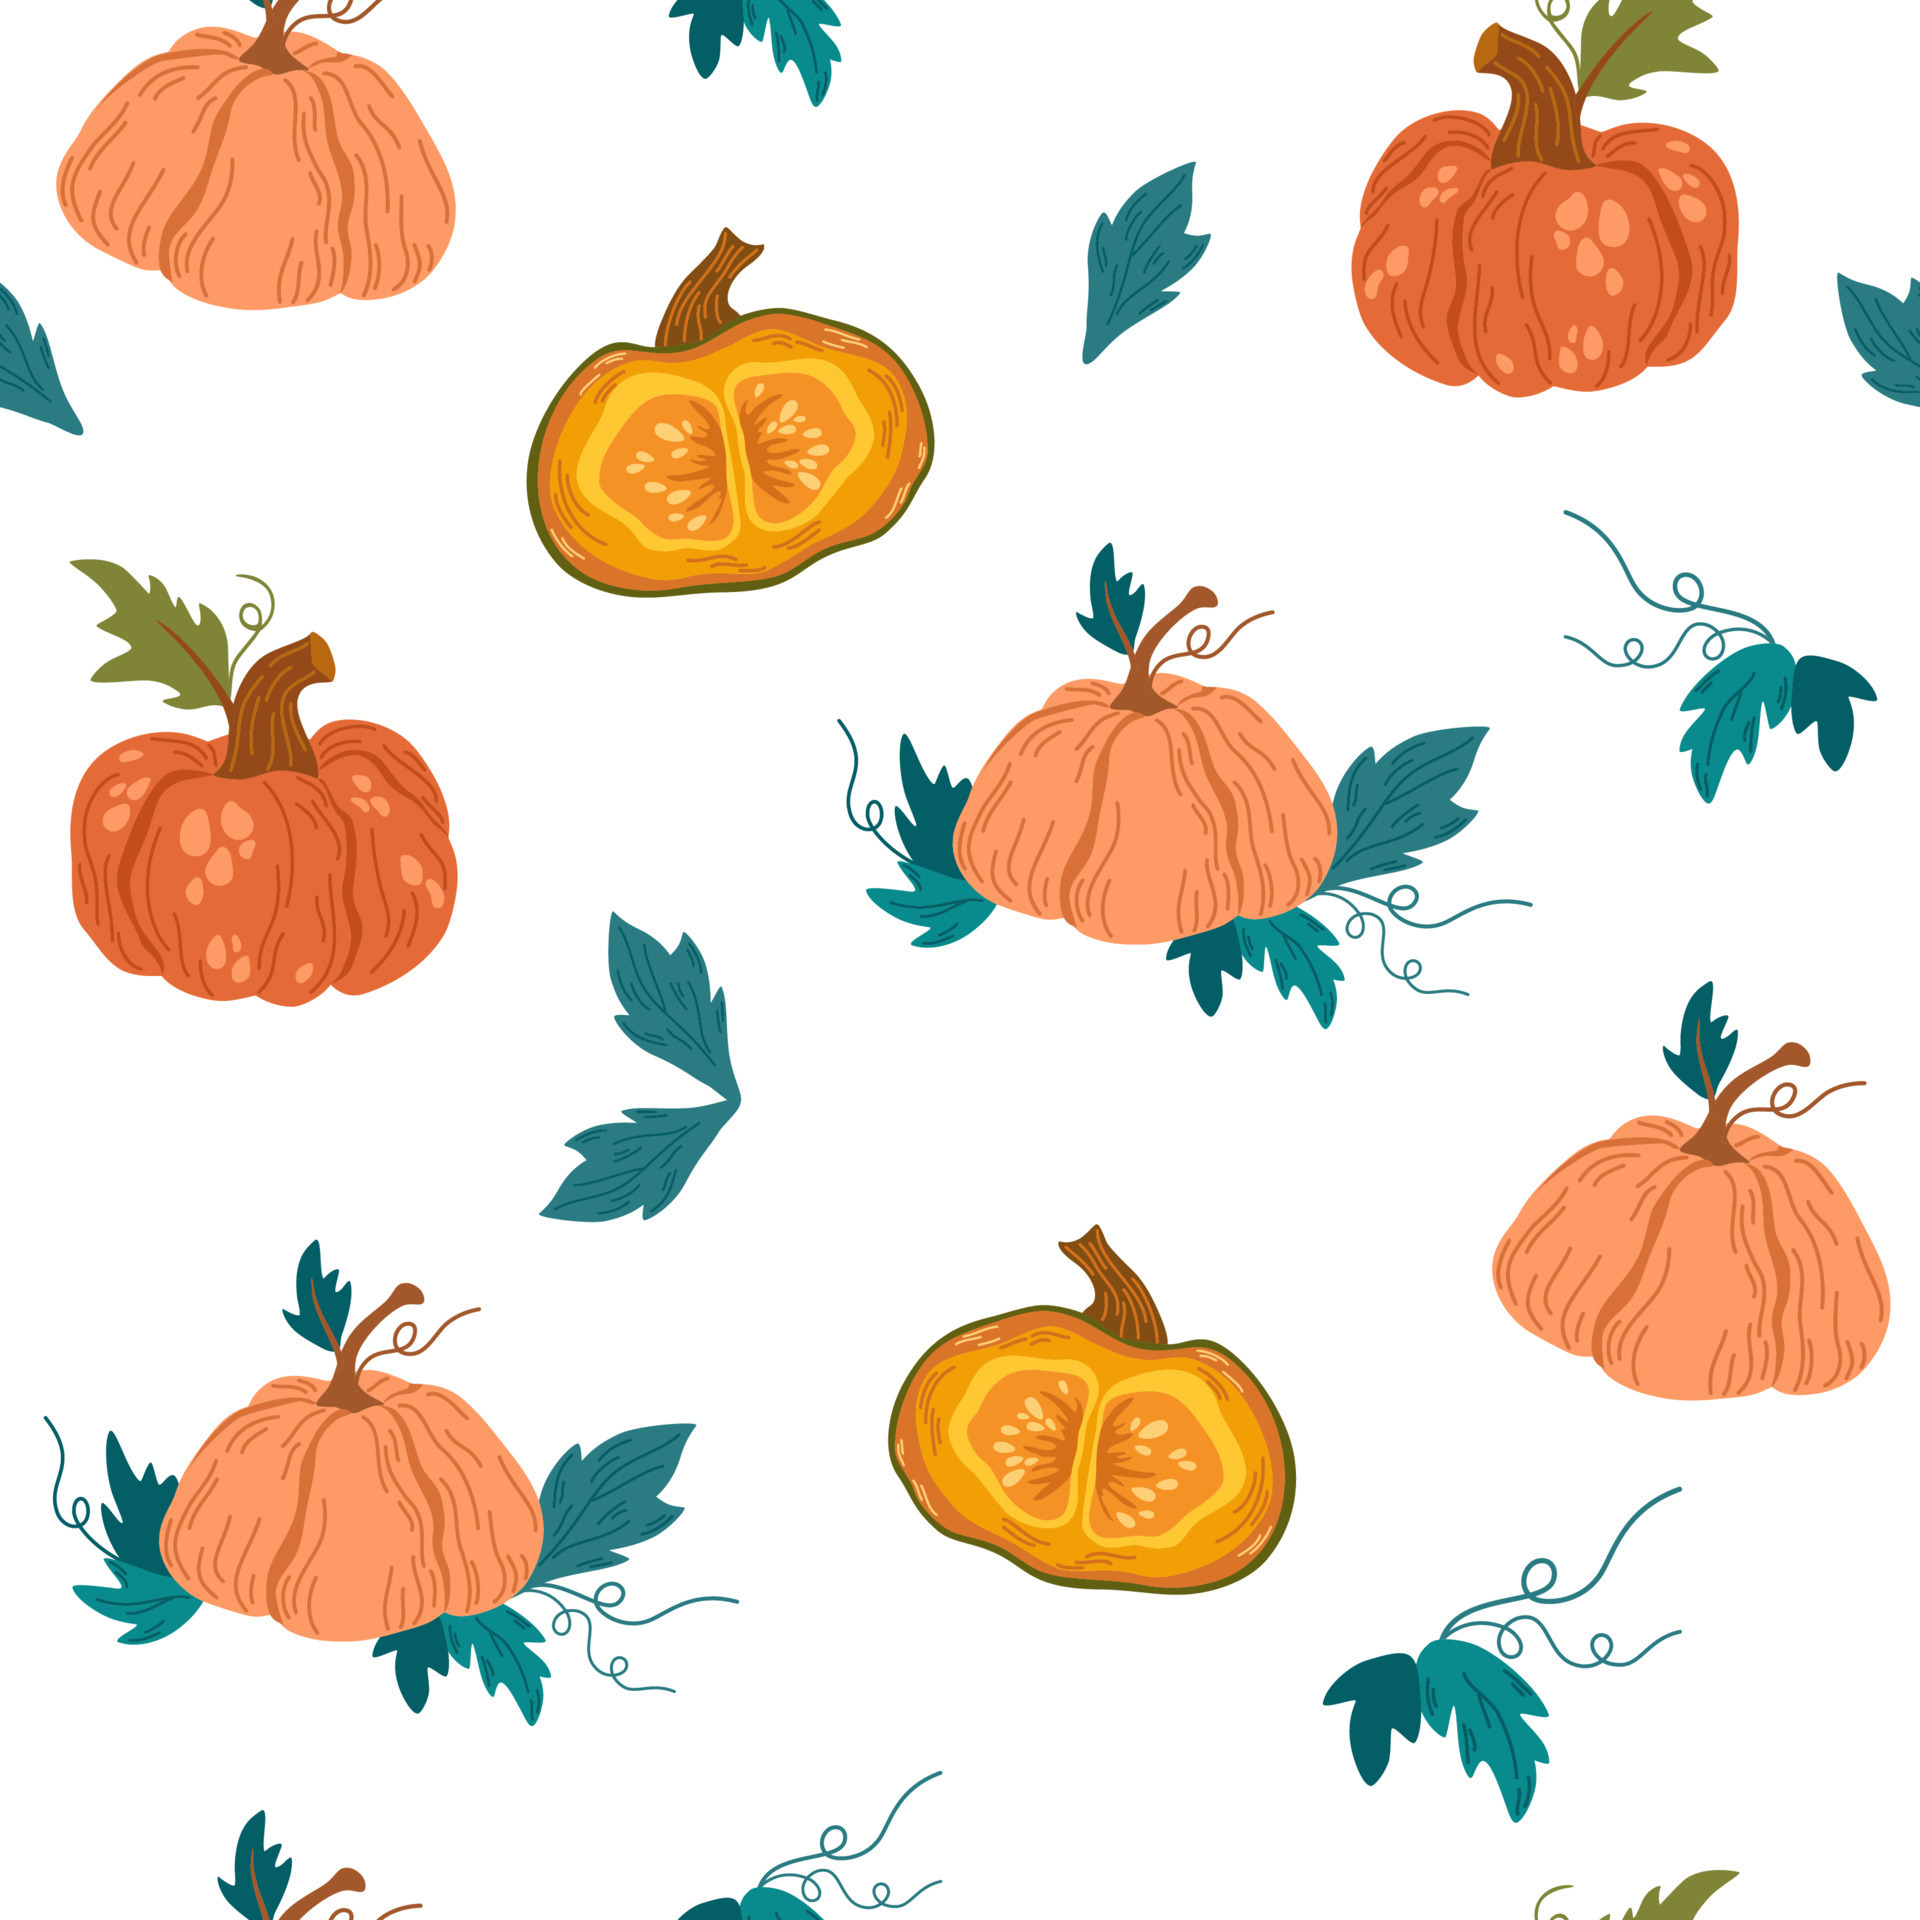 Pumpkins seamless pattern. Autumn, fall, thanksgiving and halloween decoration. Pumpkin shapes with leaves, half and slices. Perfect for texture for fabric, textile, wrapping paper, wallpaper. Vector